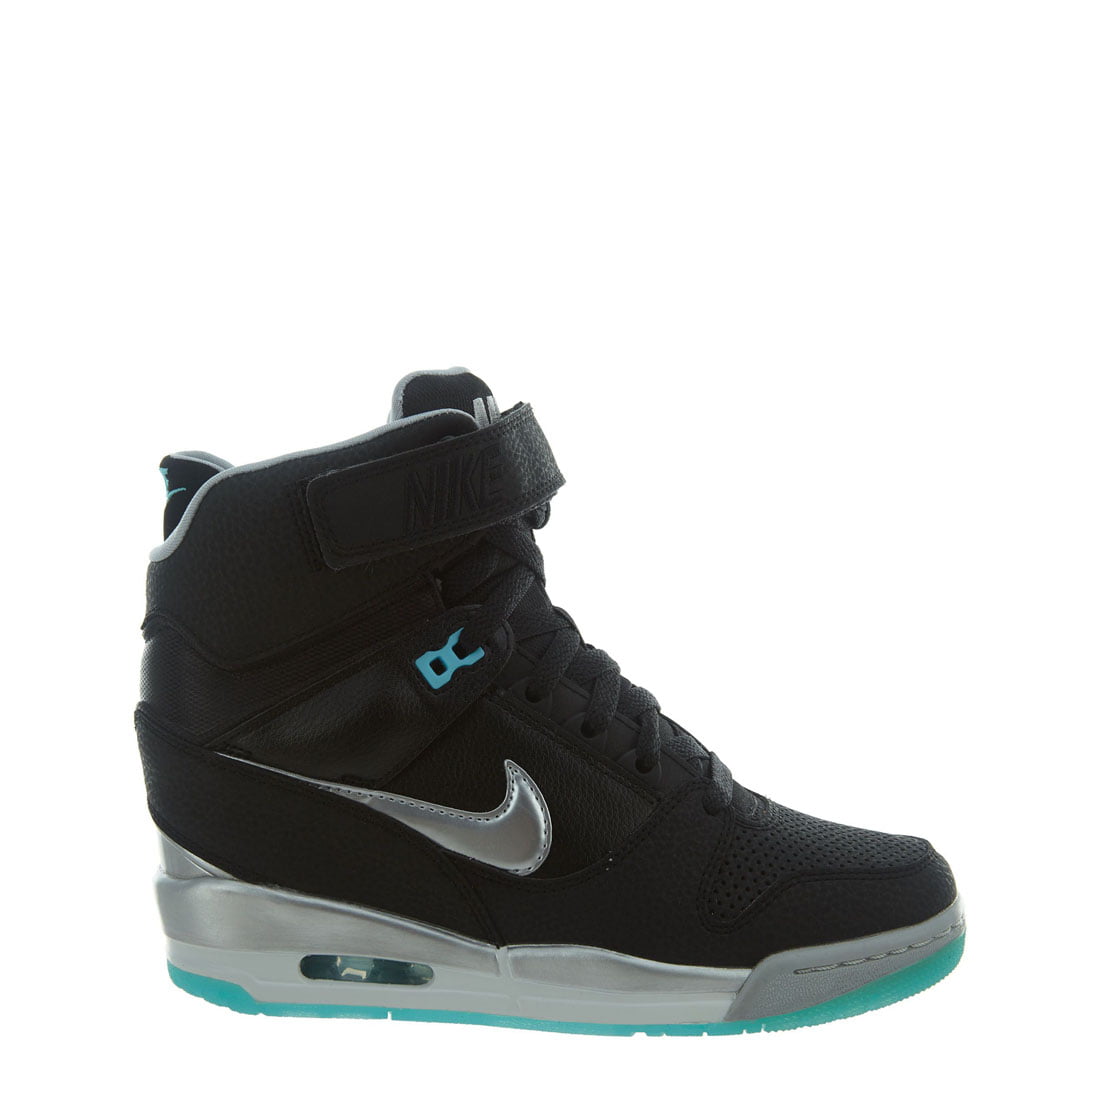 consultant Vrijstelling optocht NIKE Air Revolution Sky Hi Women/Adult shoe size 8.5 Casual 599410-014  Black Metallic Silver Clearwater White - Walmart.com